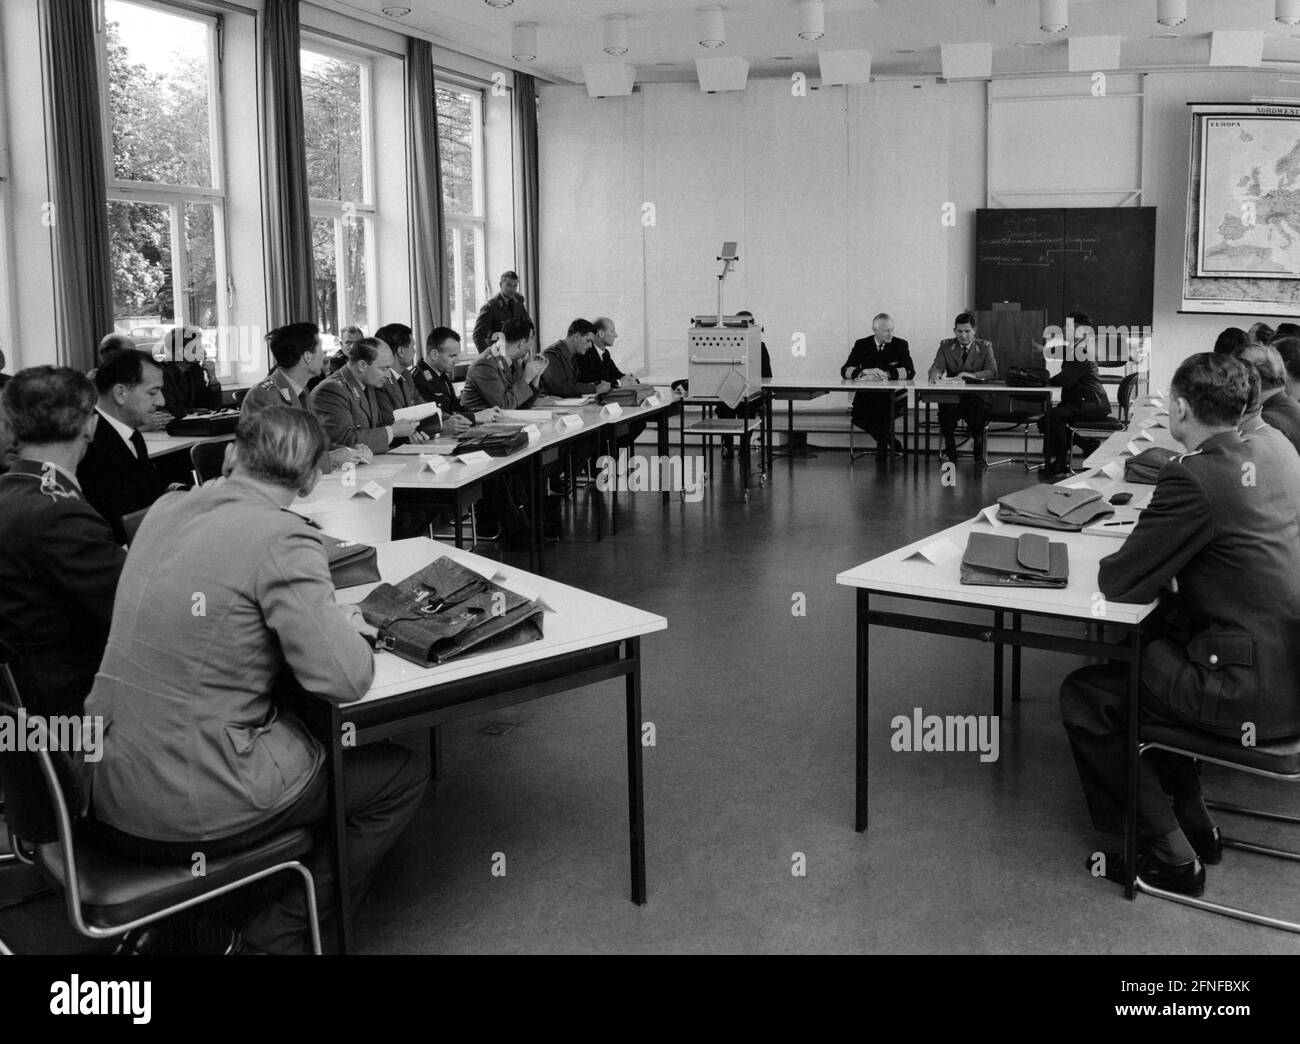 Classes at the Bundeswehr Command and Staff College in Hamburg ...